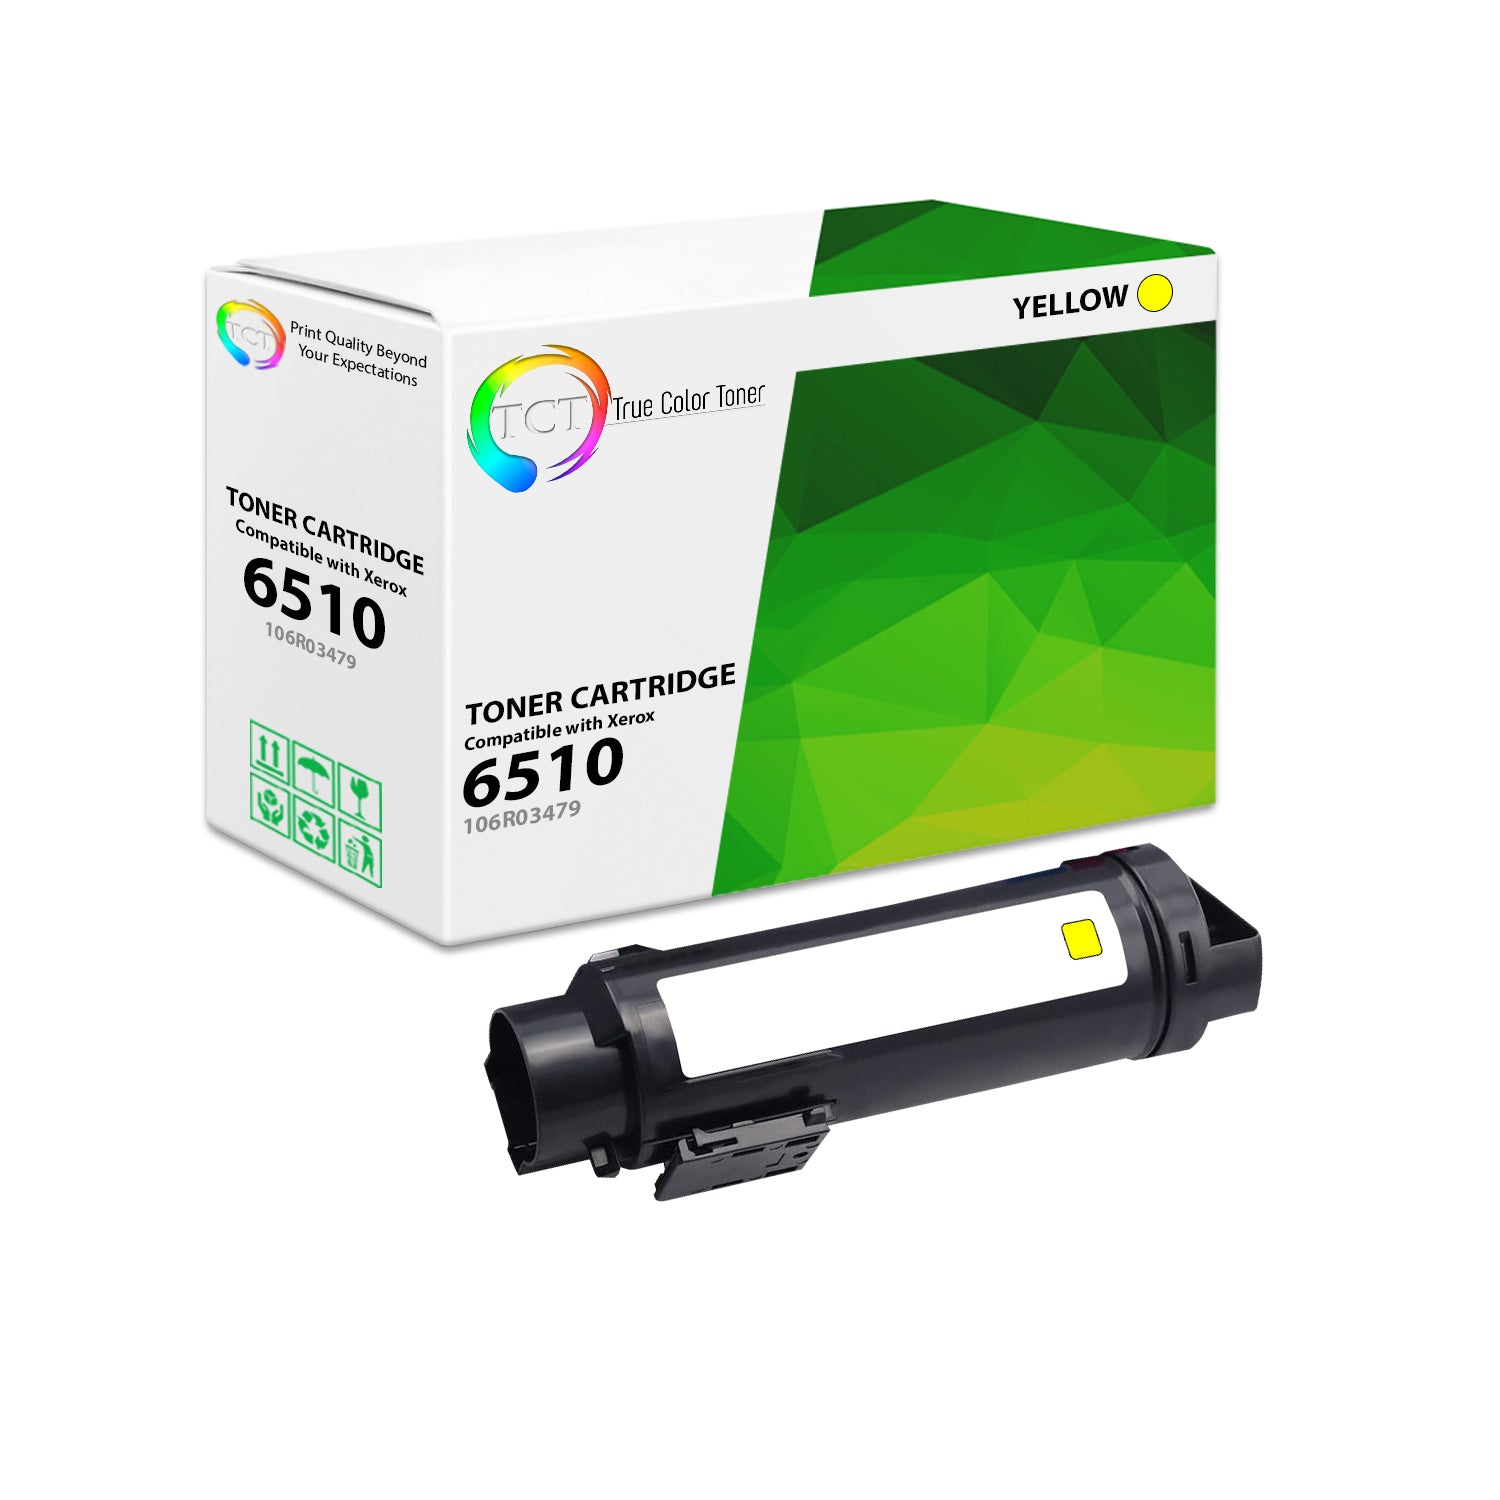 TCT Compatible Toner Cartridge Replacement for the Xerox 6510 Series - 1 Pack Yellow